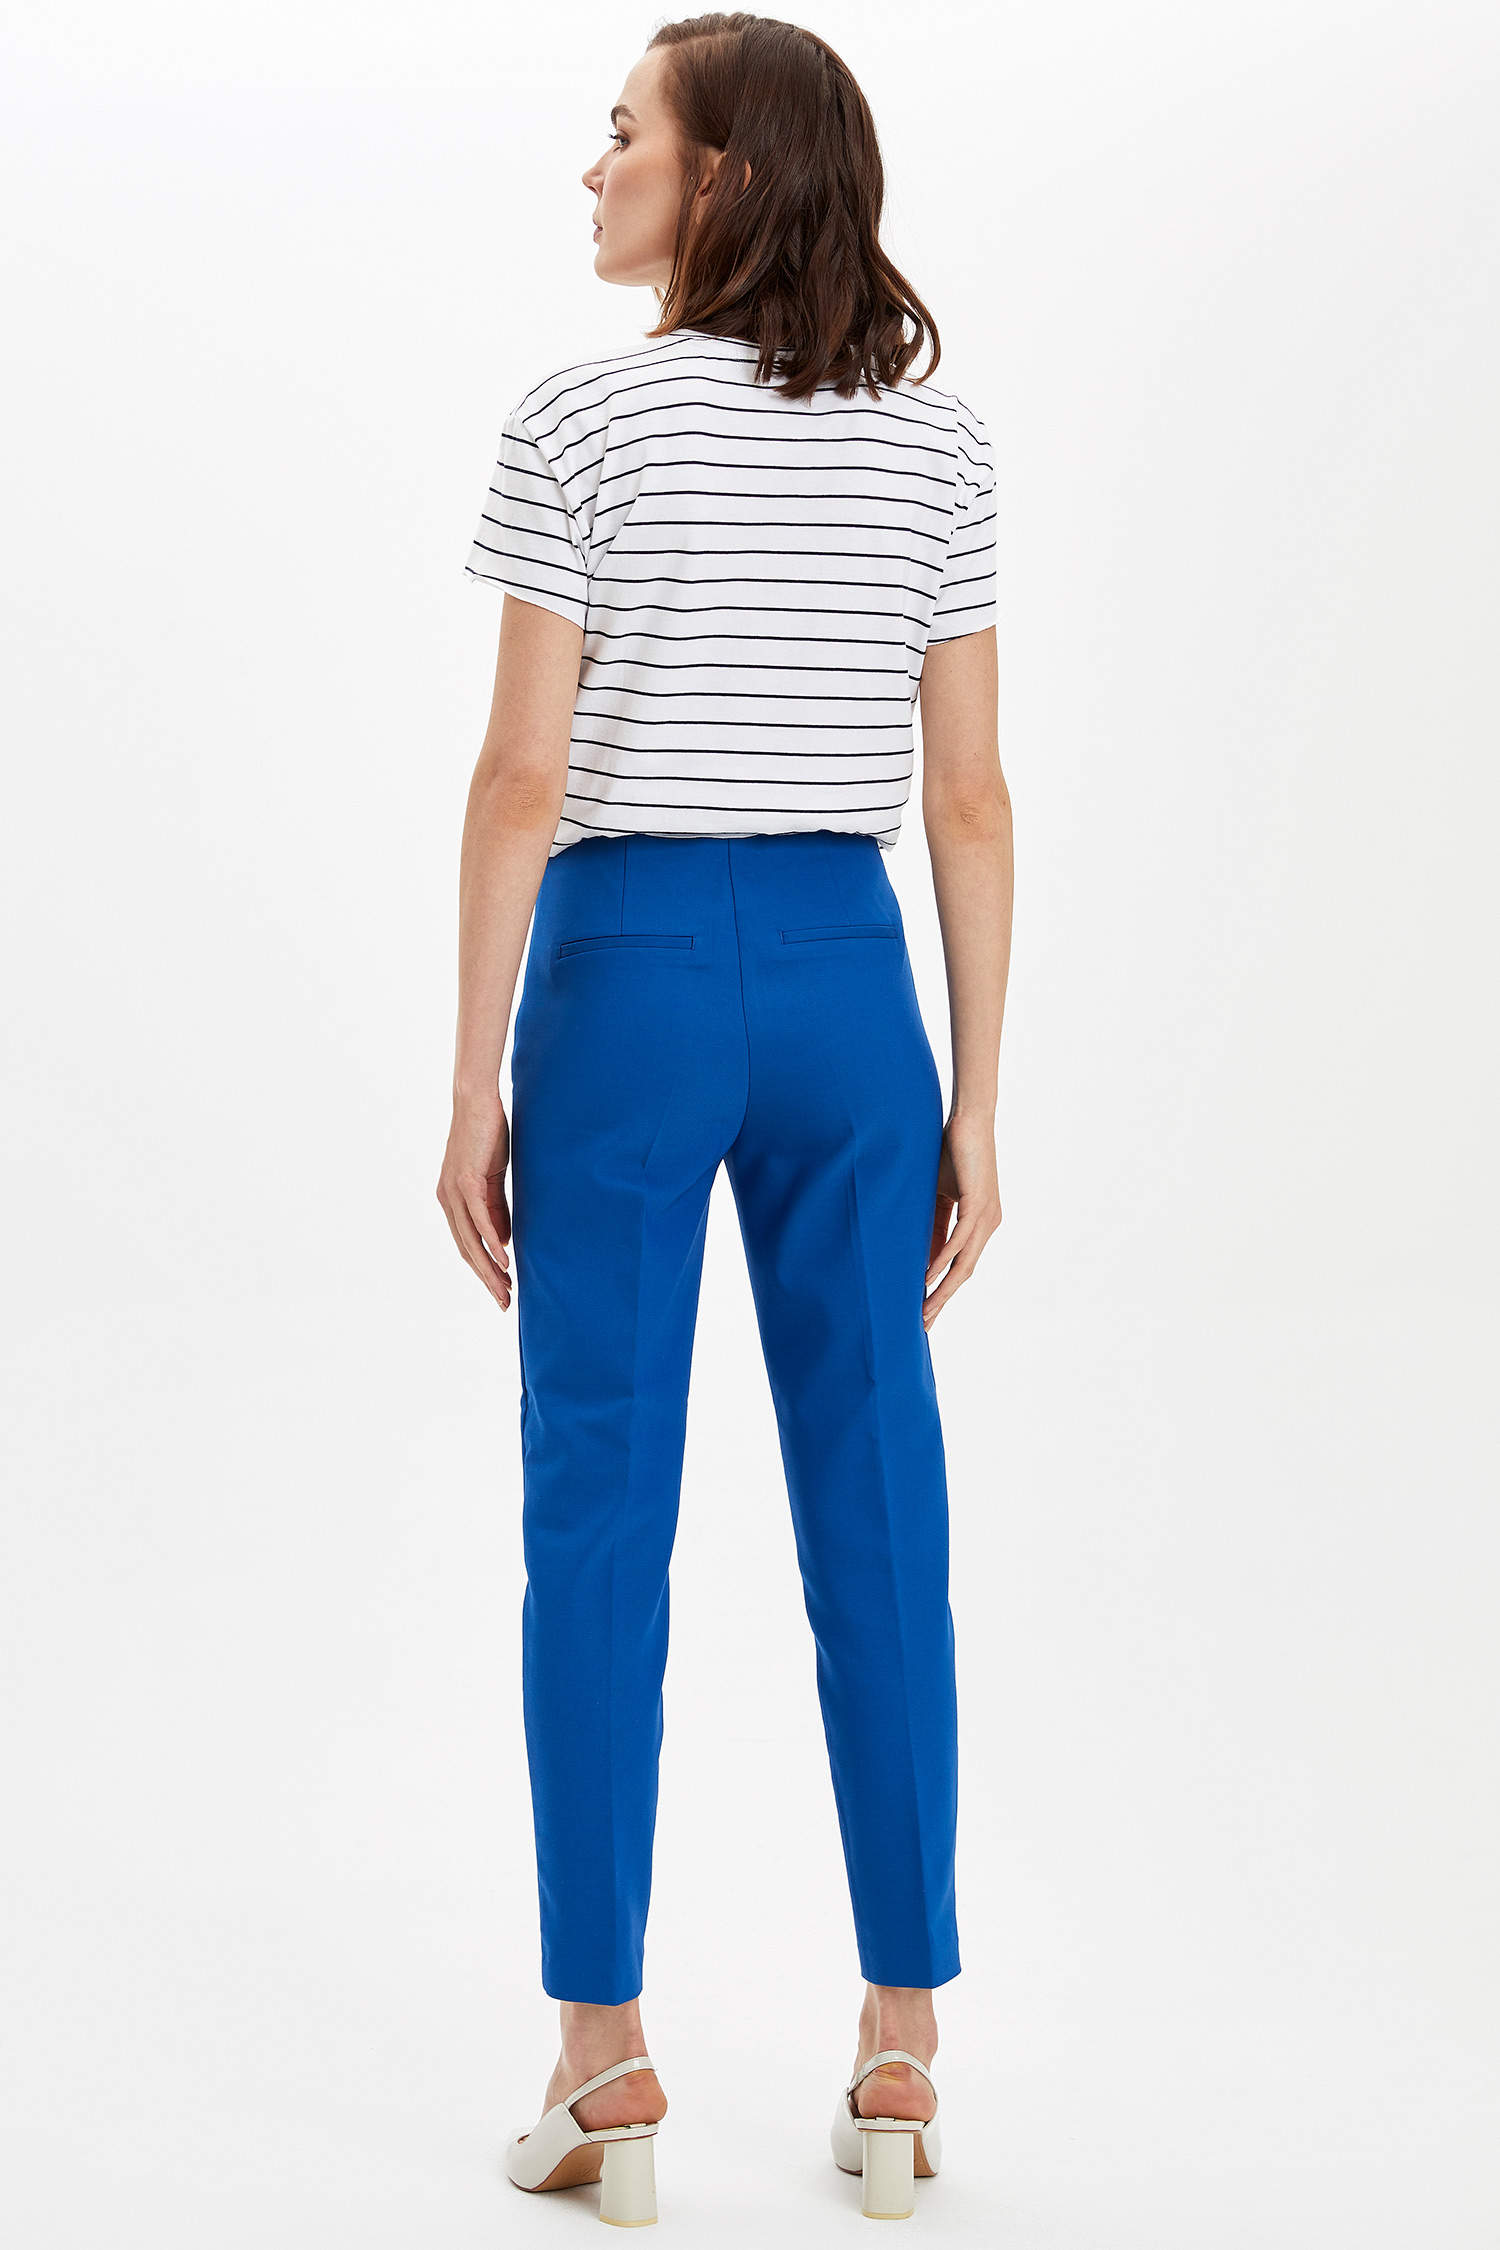 Blue WOMAN High Waisted Slim Fit Trousers 1212728 | DeFacto